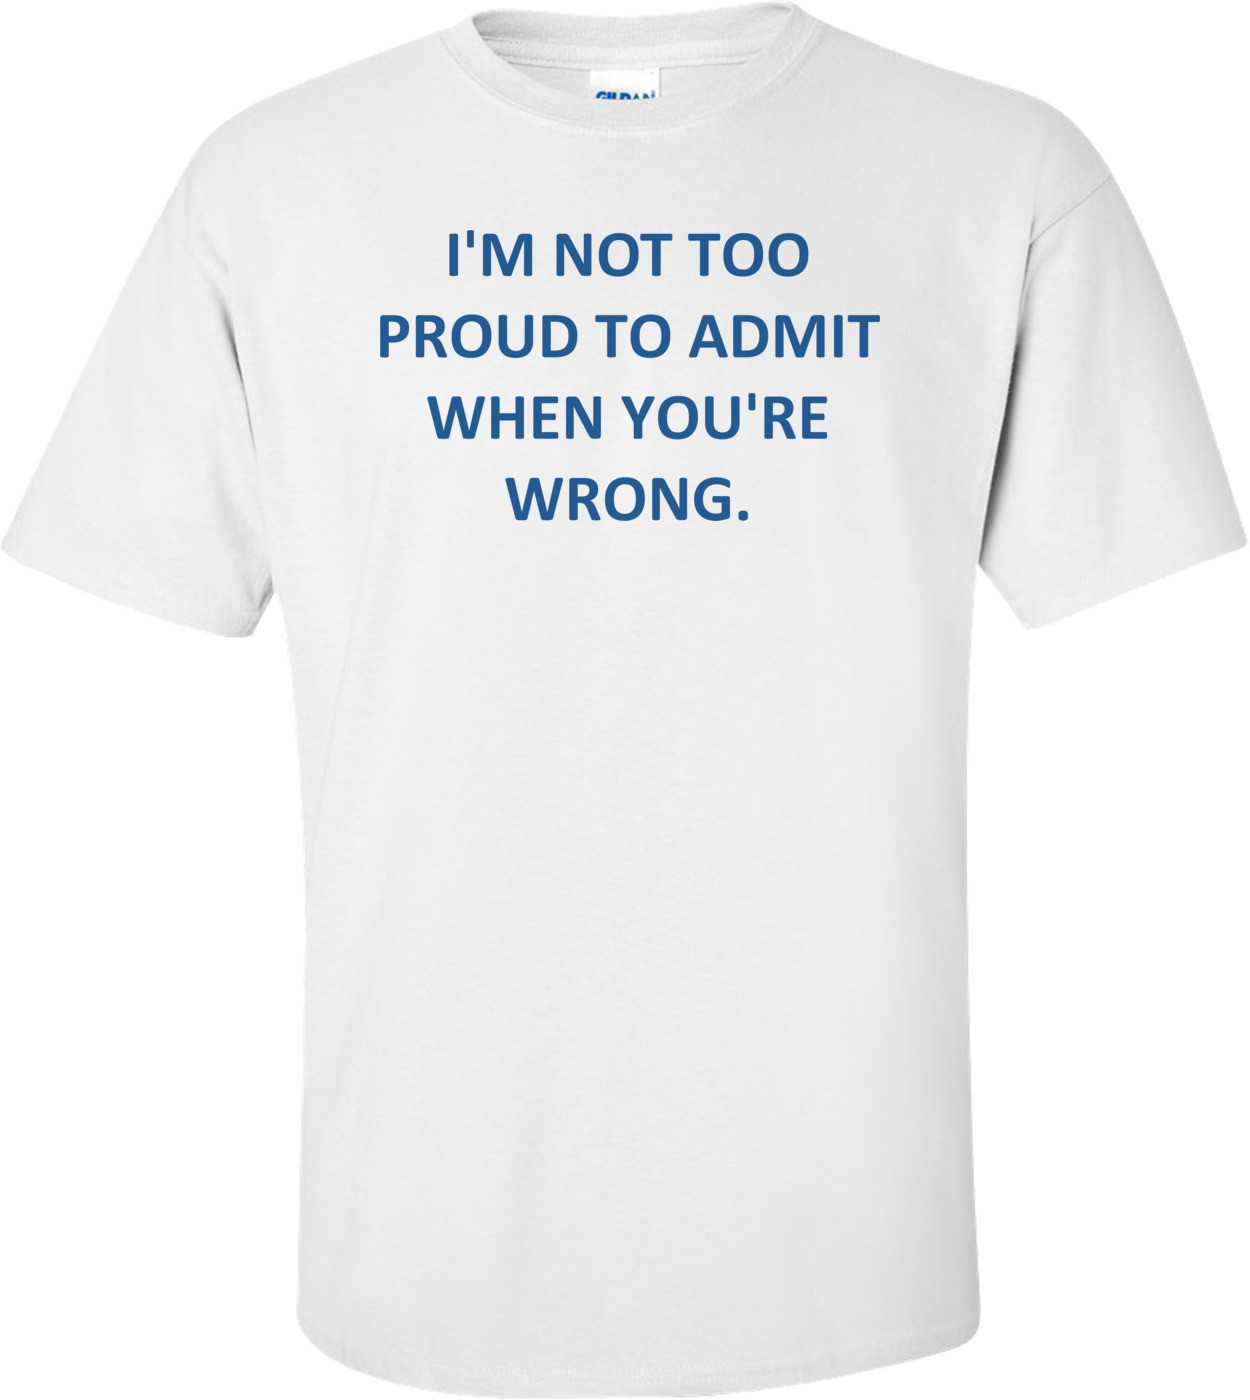 I'M NOT TOO PROUD TO ADMIT WHEN YOU'RE WRONG.